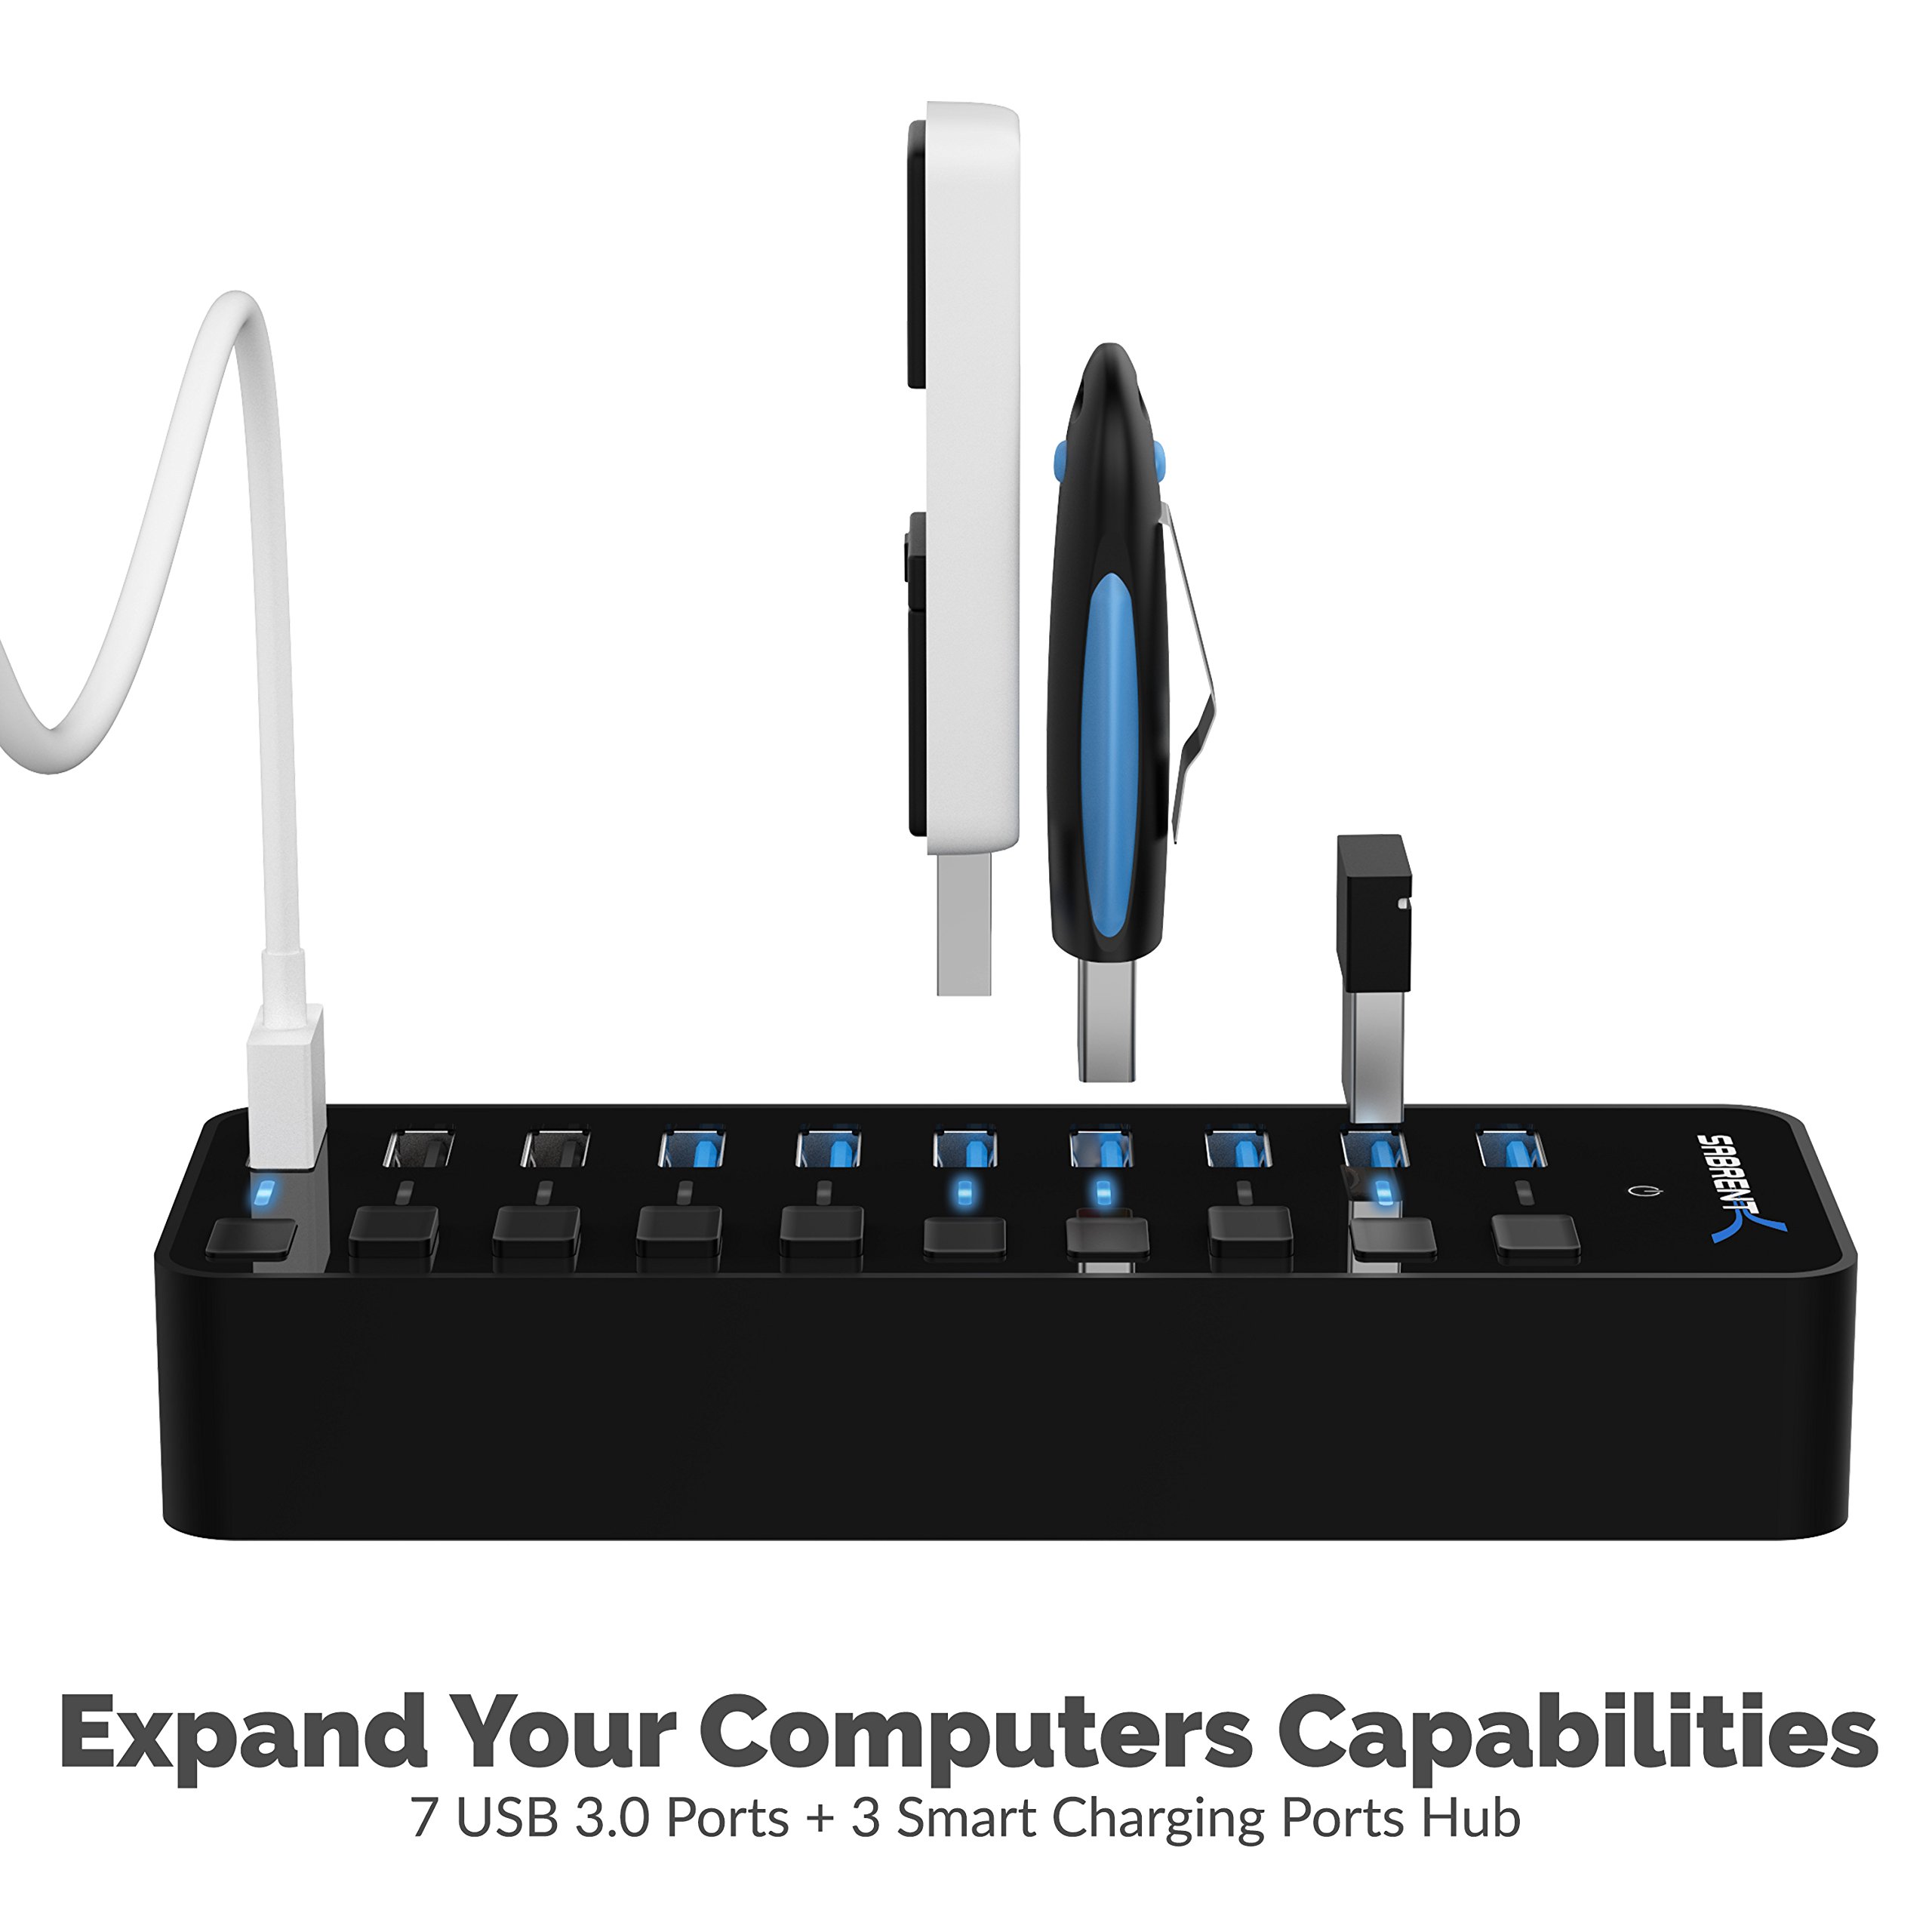 SABRENT 60W 10 Port USB 3.0 Hub Includes 3 Smart Charging Ports with Individual Power Switches and LEDs and 60W 12V/5A Power Adapter (HB-B7C3)